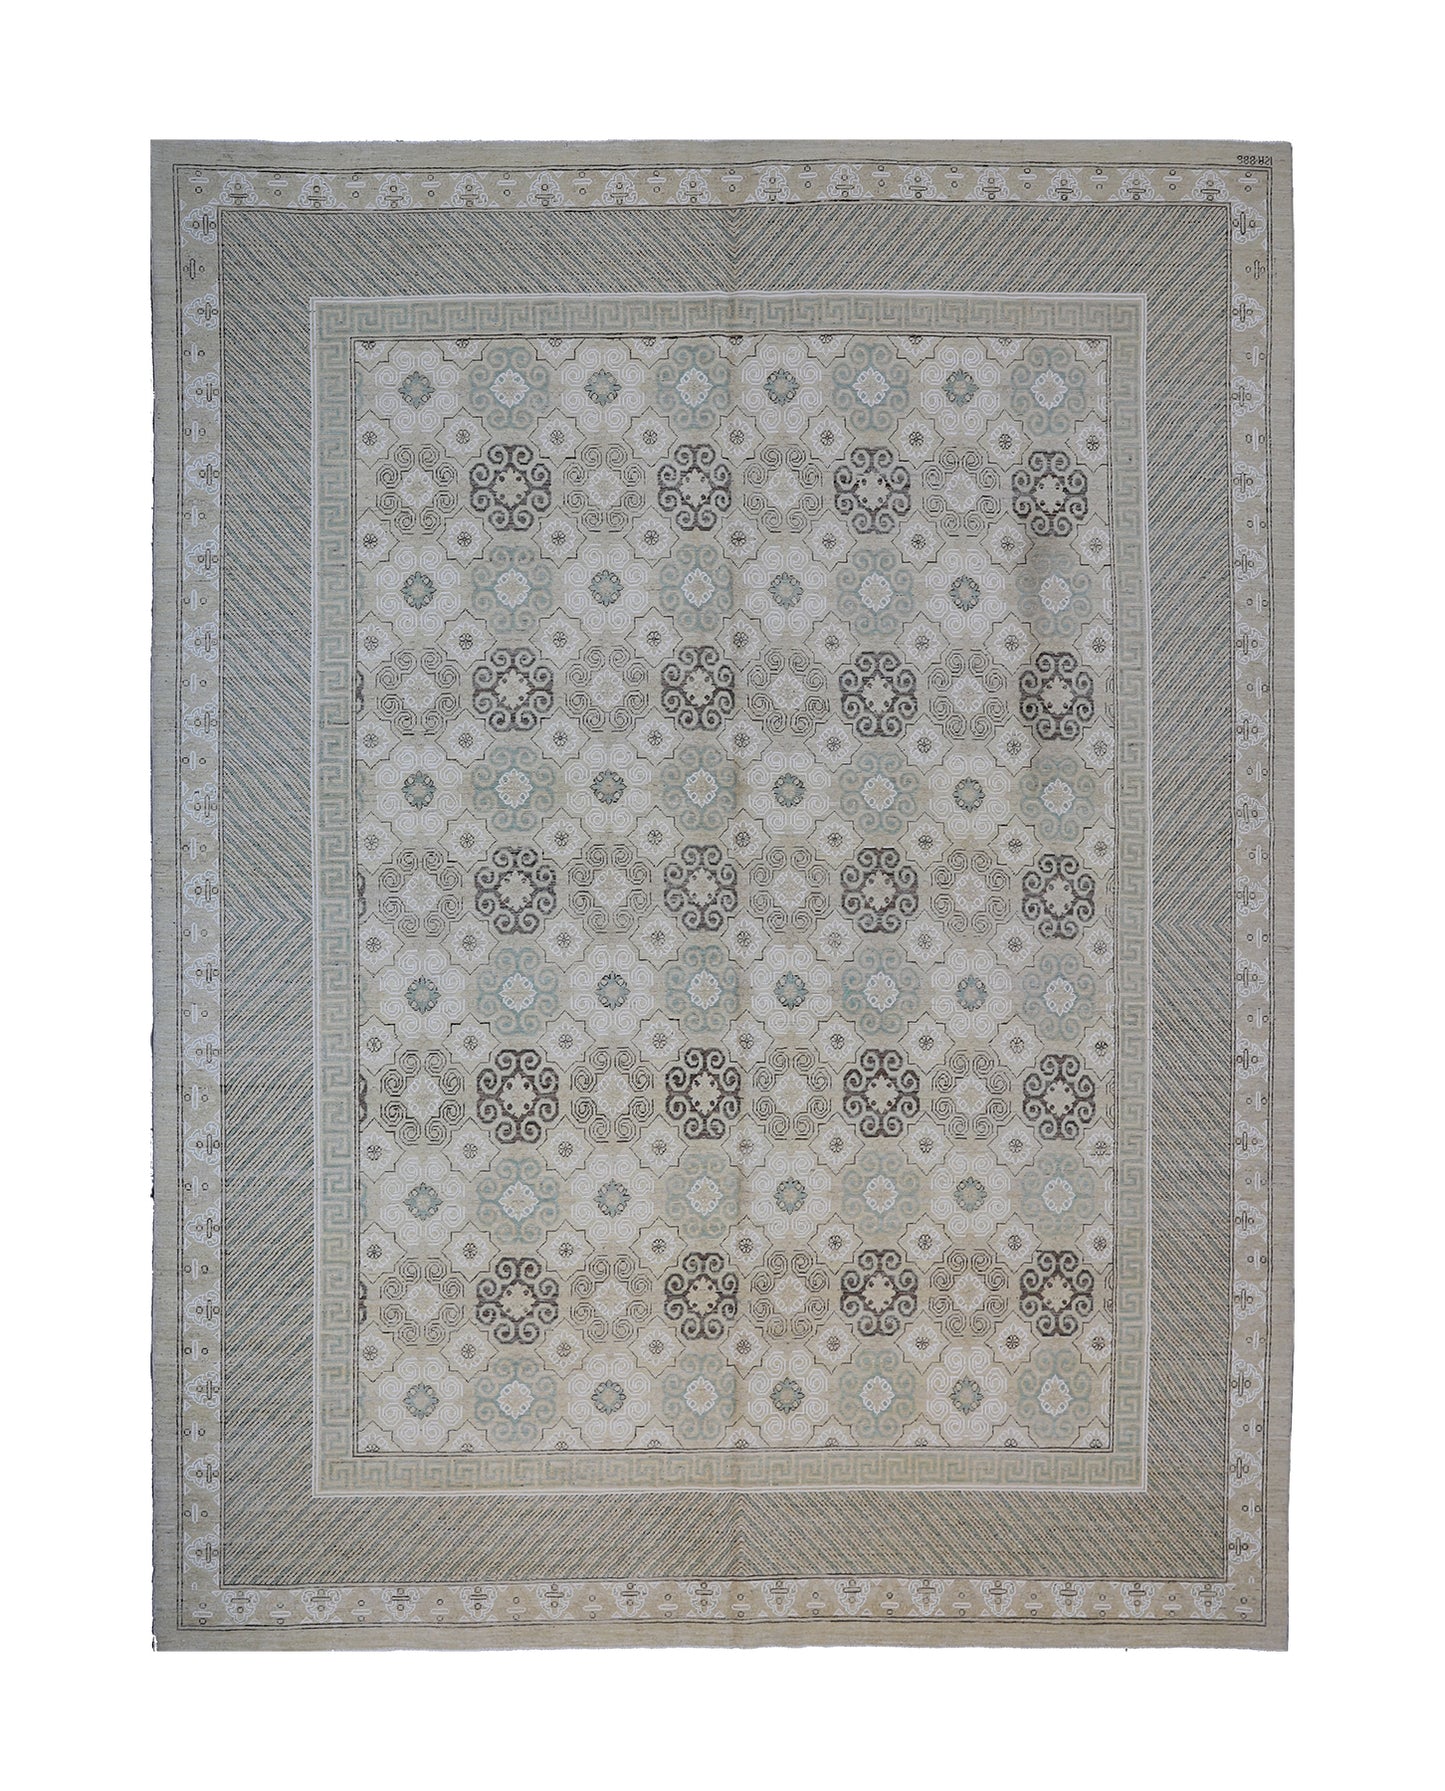 10'x13' Ariana Khotan Hand Knotted Patina Rug in Beige and Blue Colors